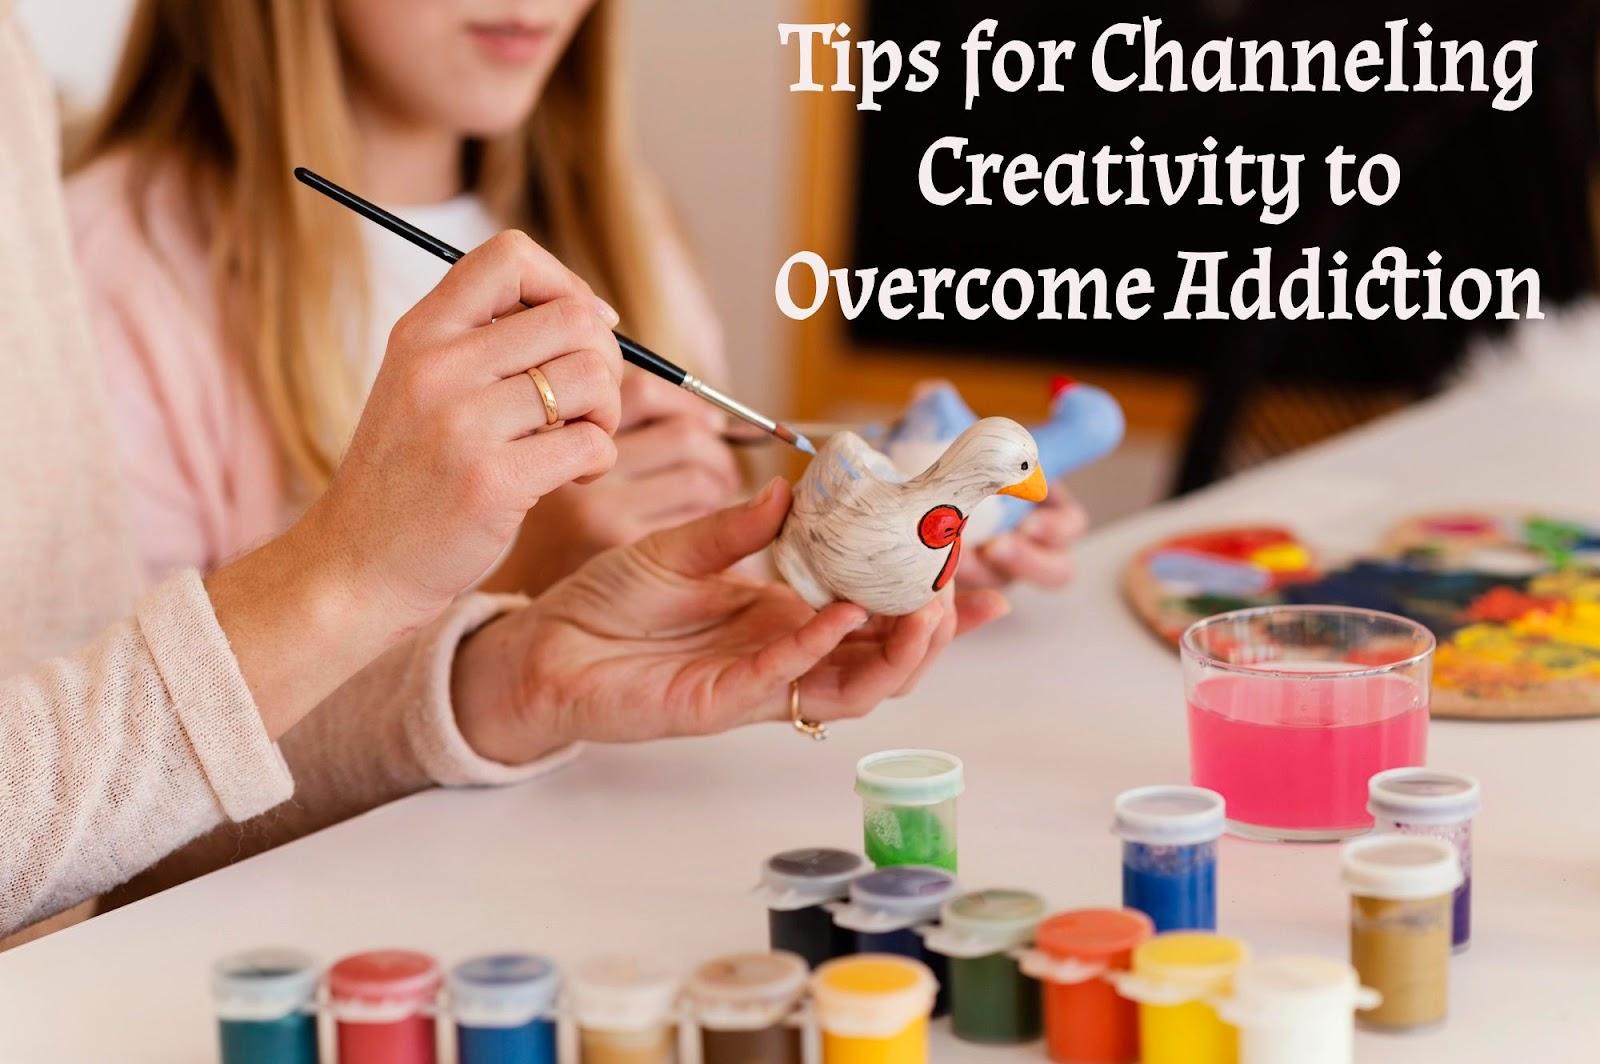 Channeling Creativity to Overcome Addiction